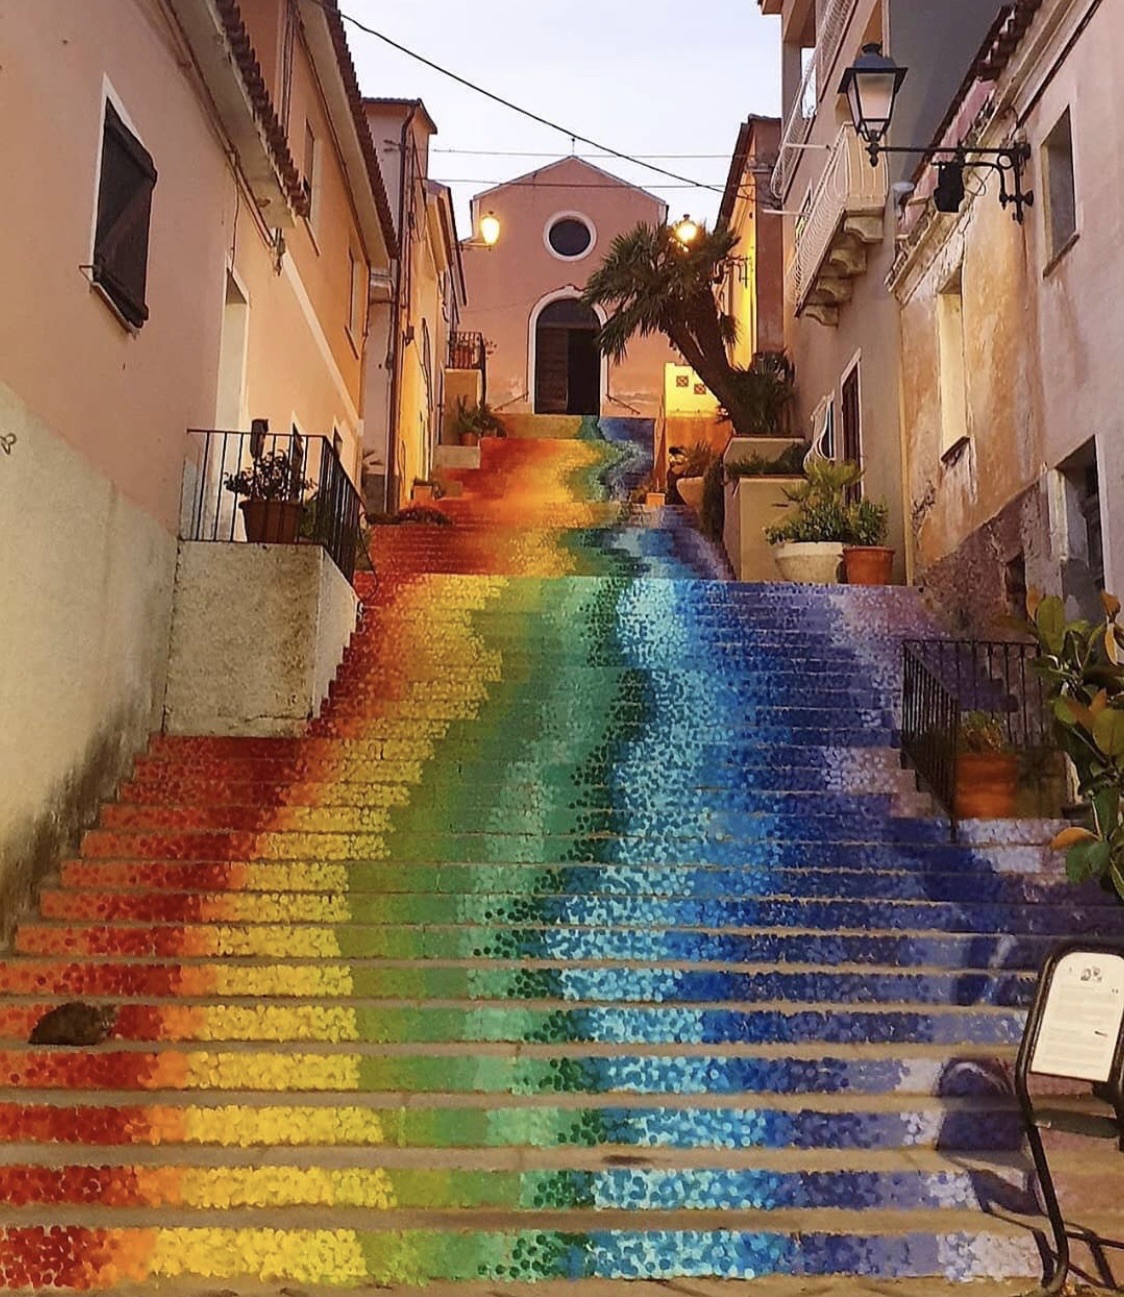 This rainbow staircase is neat